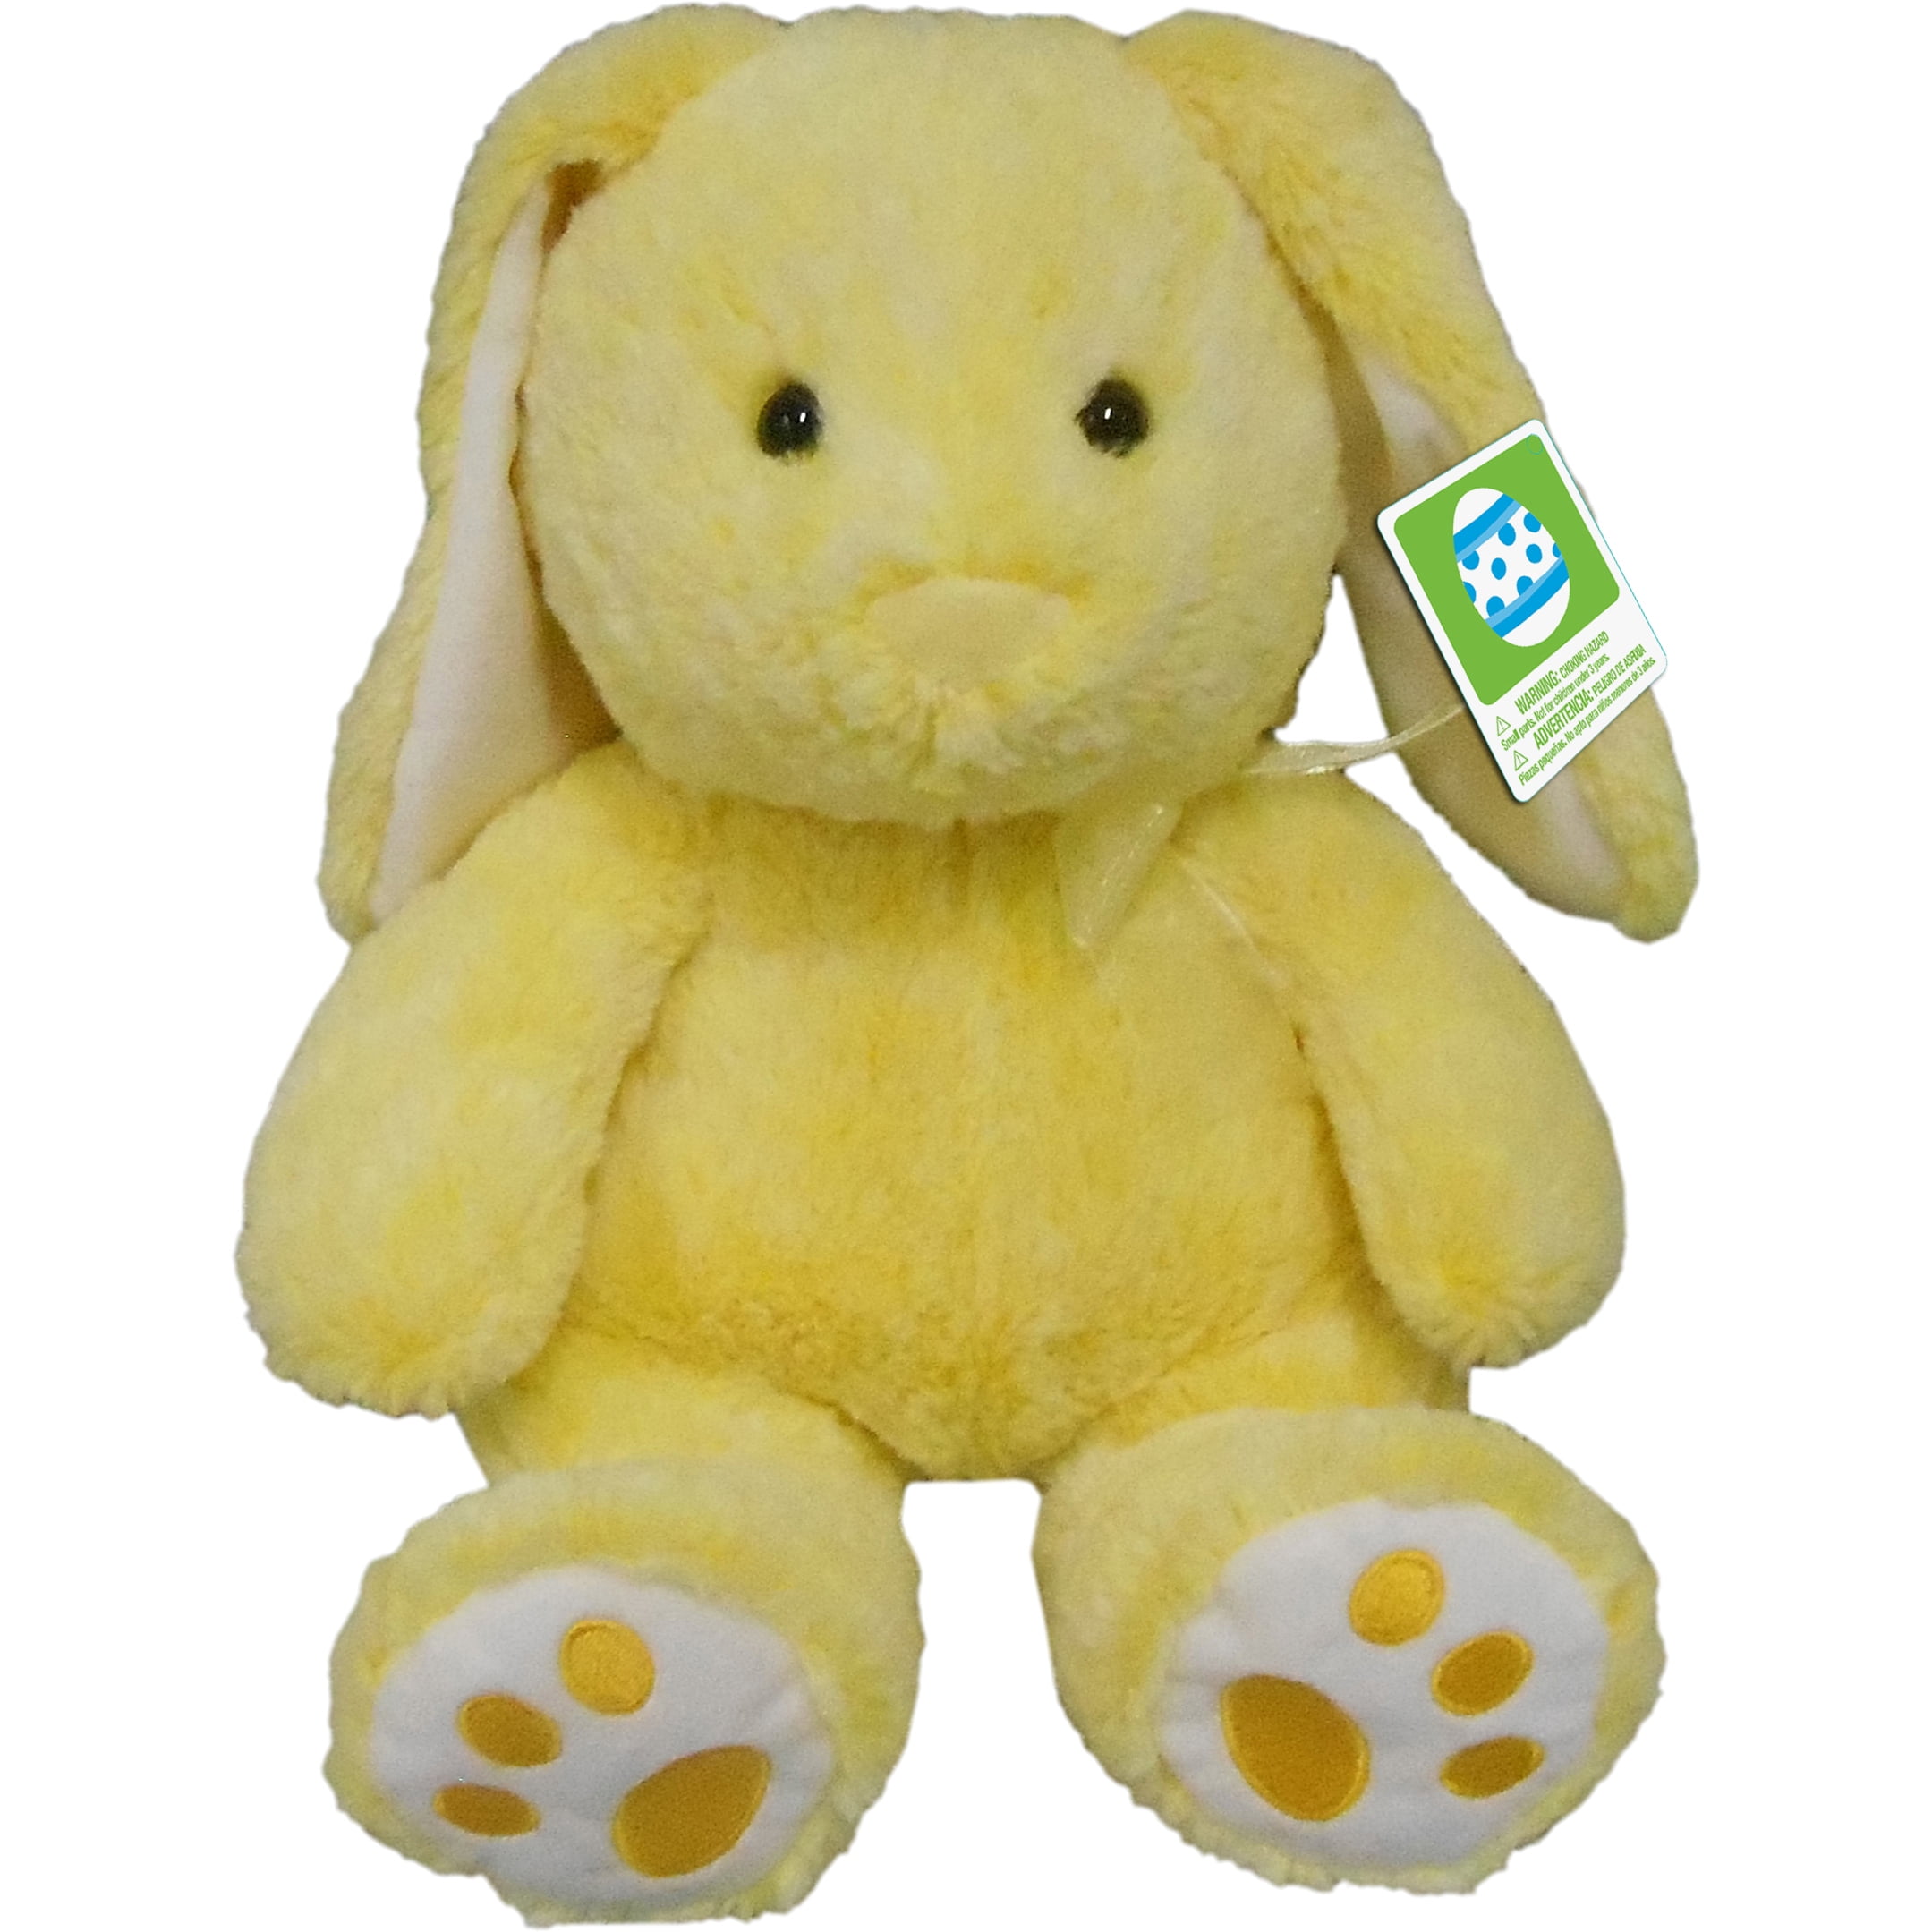 Details about   EASTER BUNNY YELLOW PLUSH #yelloweasterbunnyplush #easterplush #bunnyplush 